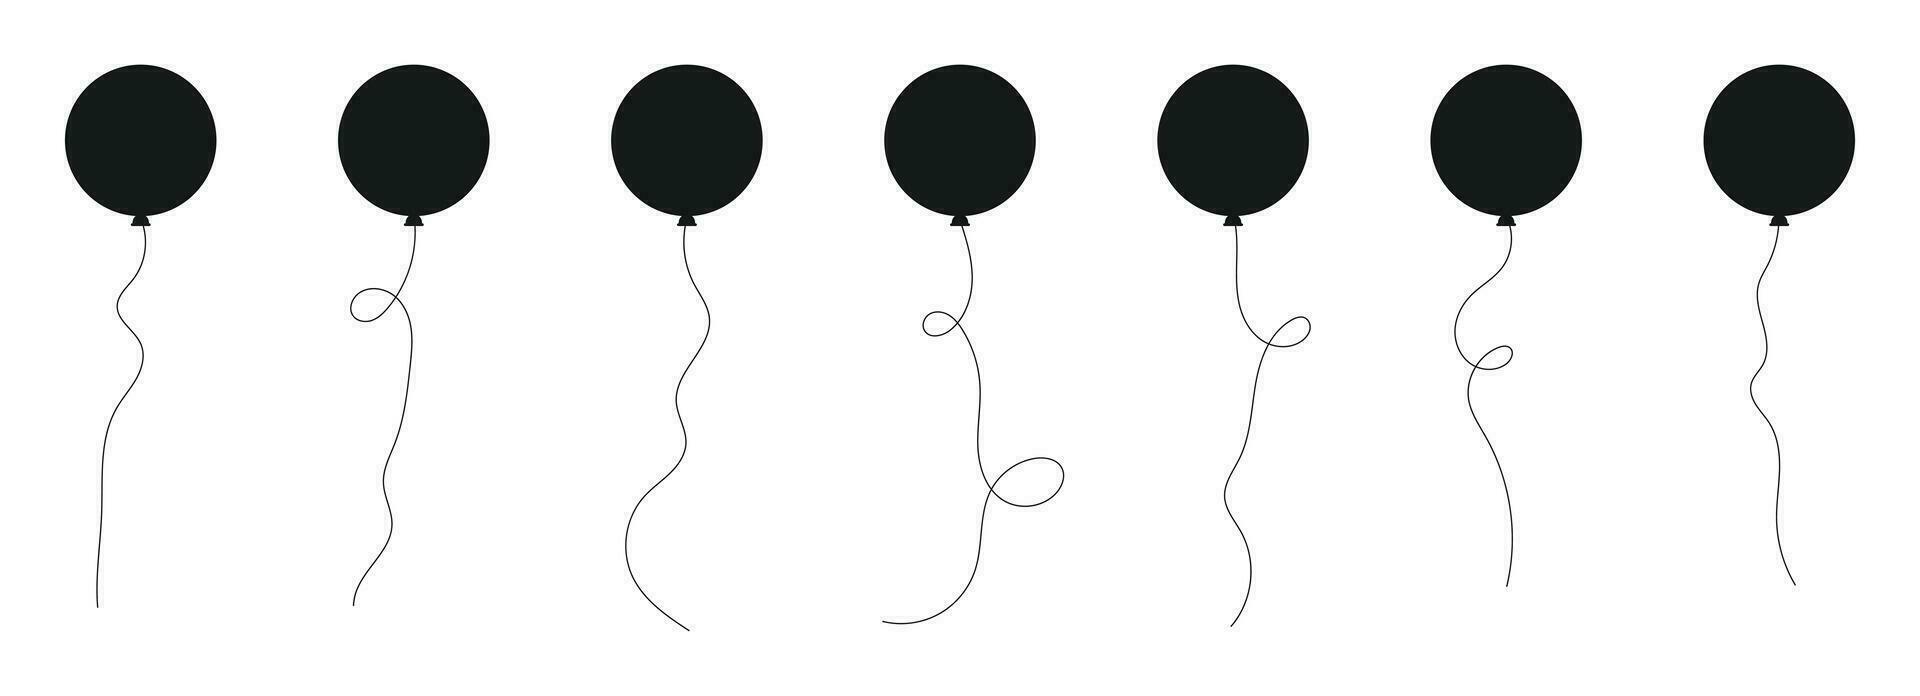 Set of black silhouette party balloons tied with strings. Vector illustration in cartoon style